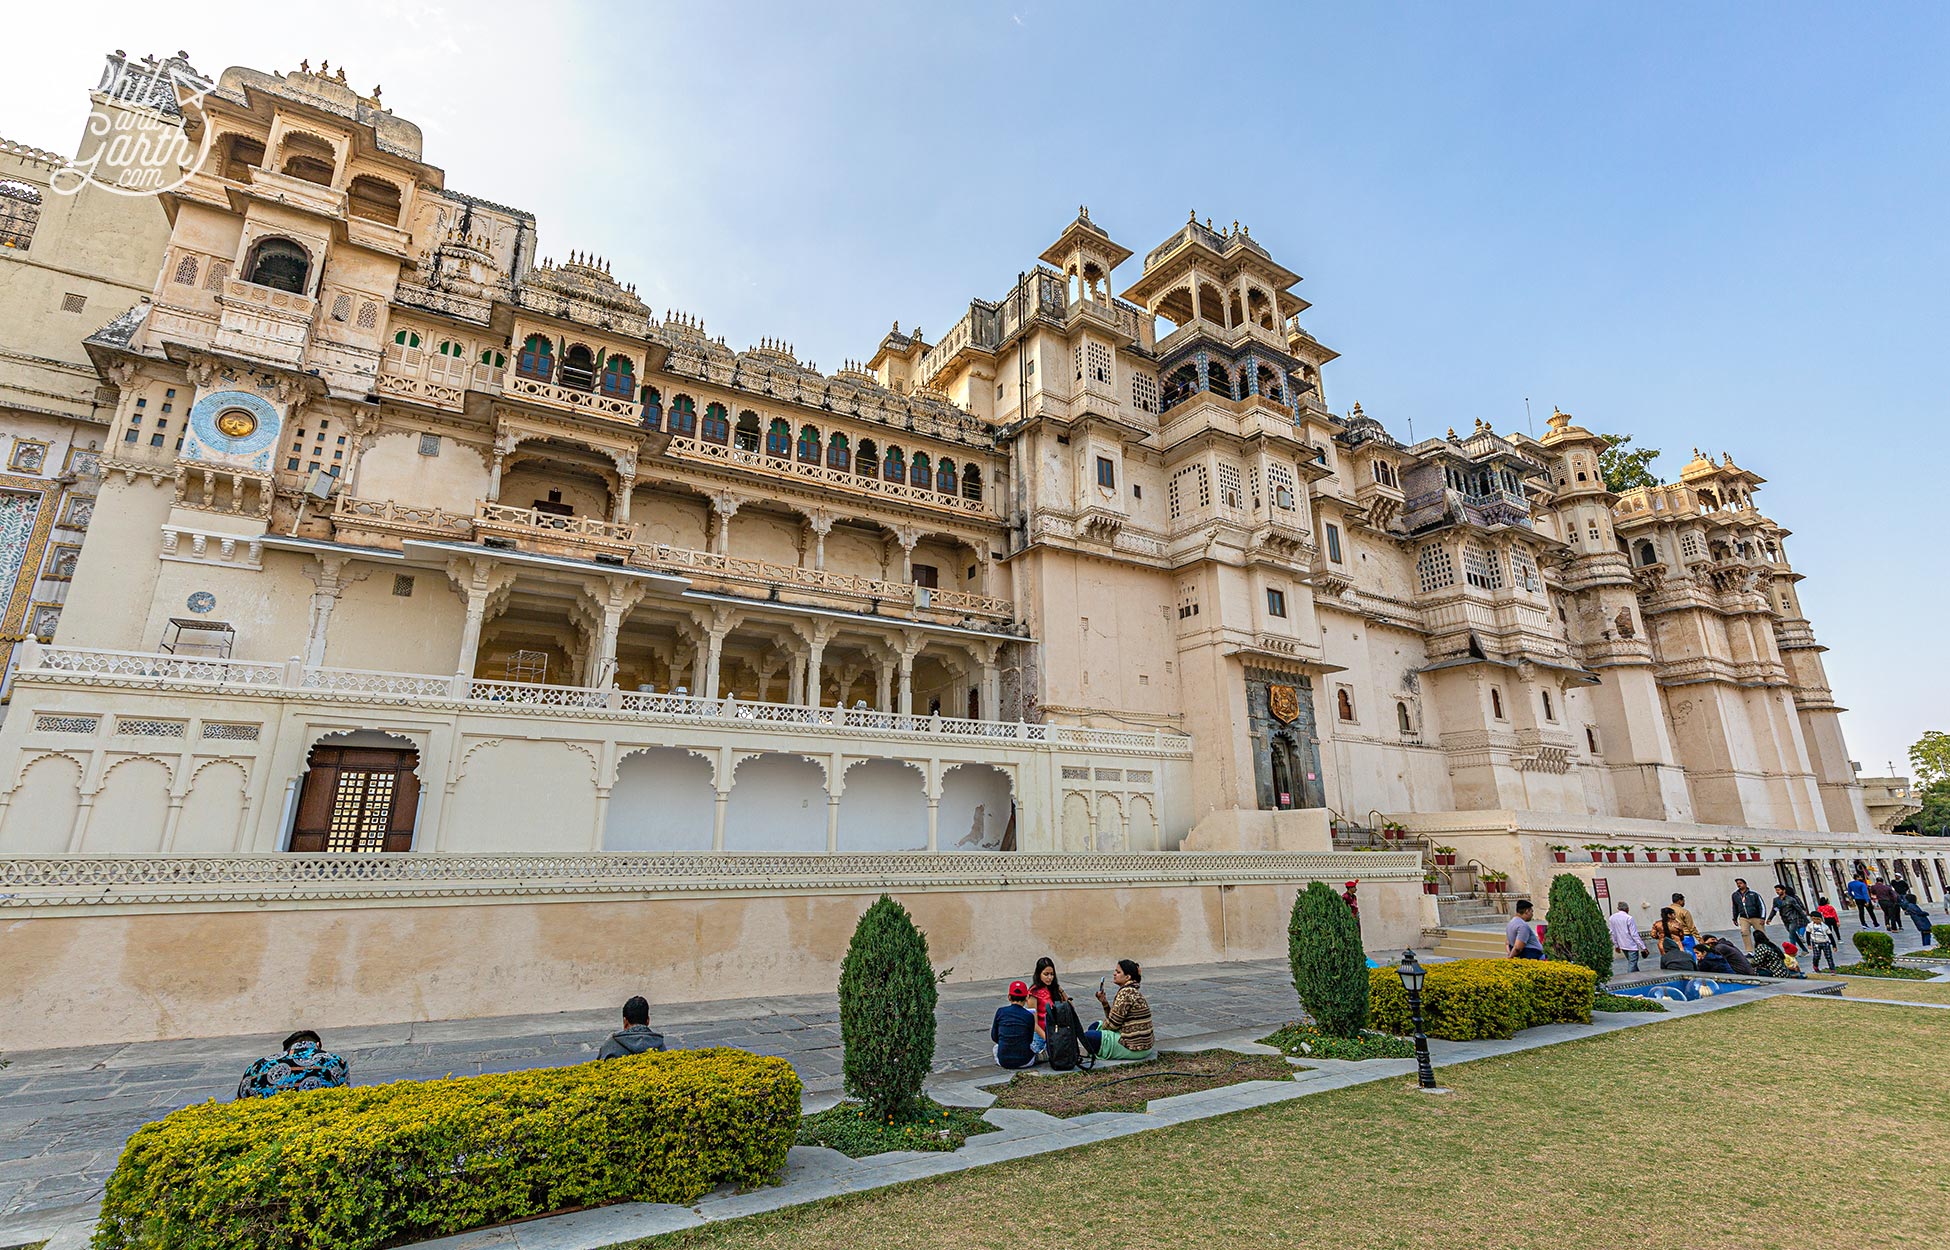 The incredibly beautiful City Palace - The must see attraction of Udaipur